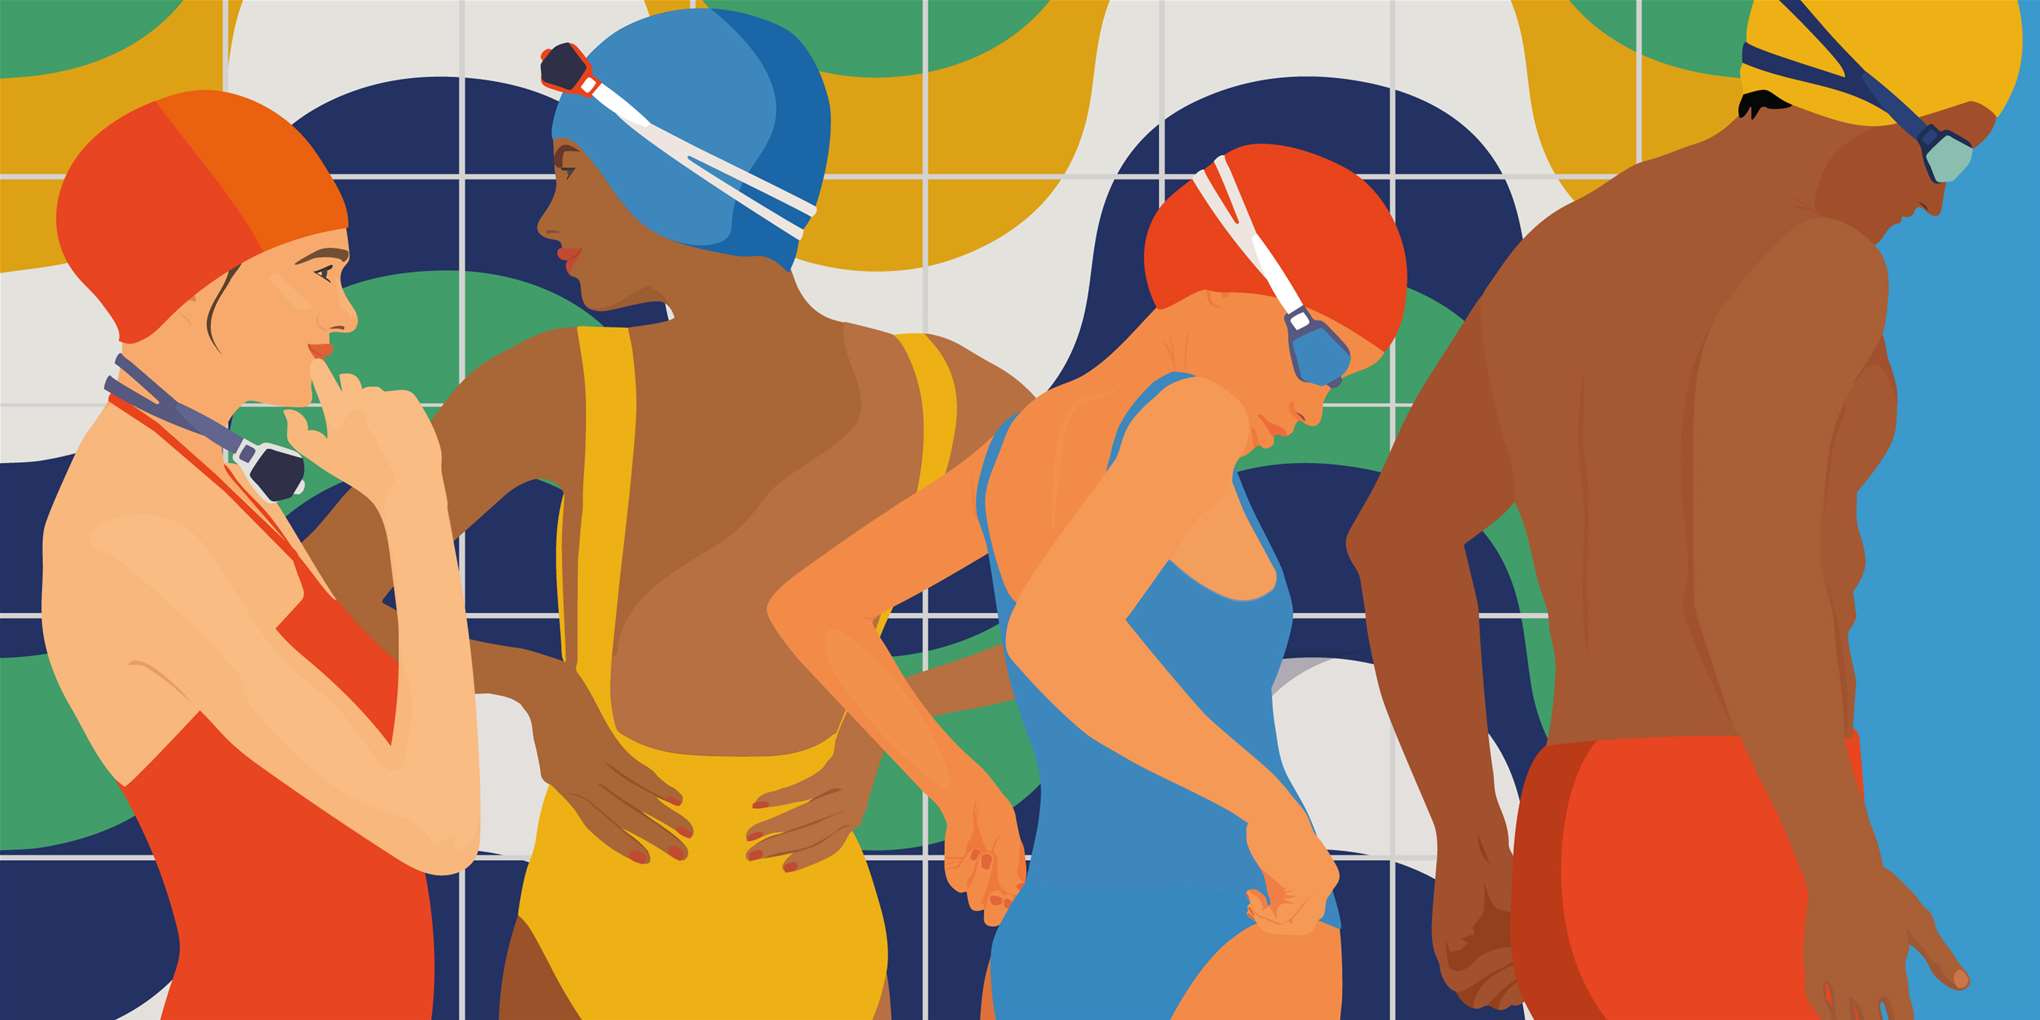 Camila Pinheiro, Bright vector digital illustration of 4 women in swimming costumes with vibrant summer patterns. Geometric shapes. 